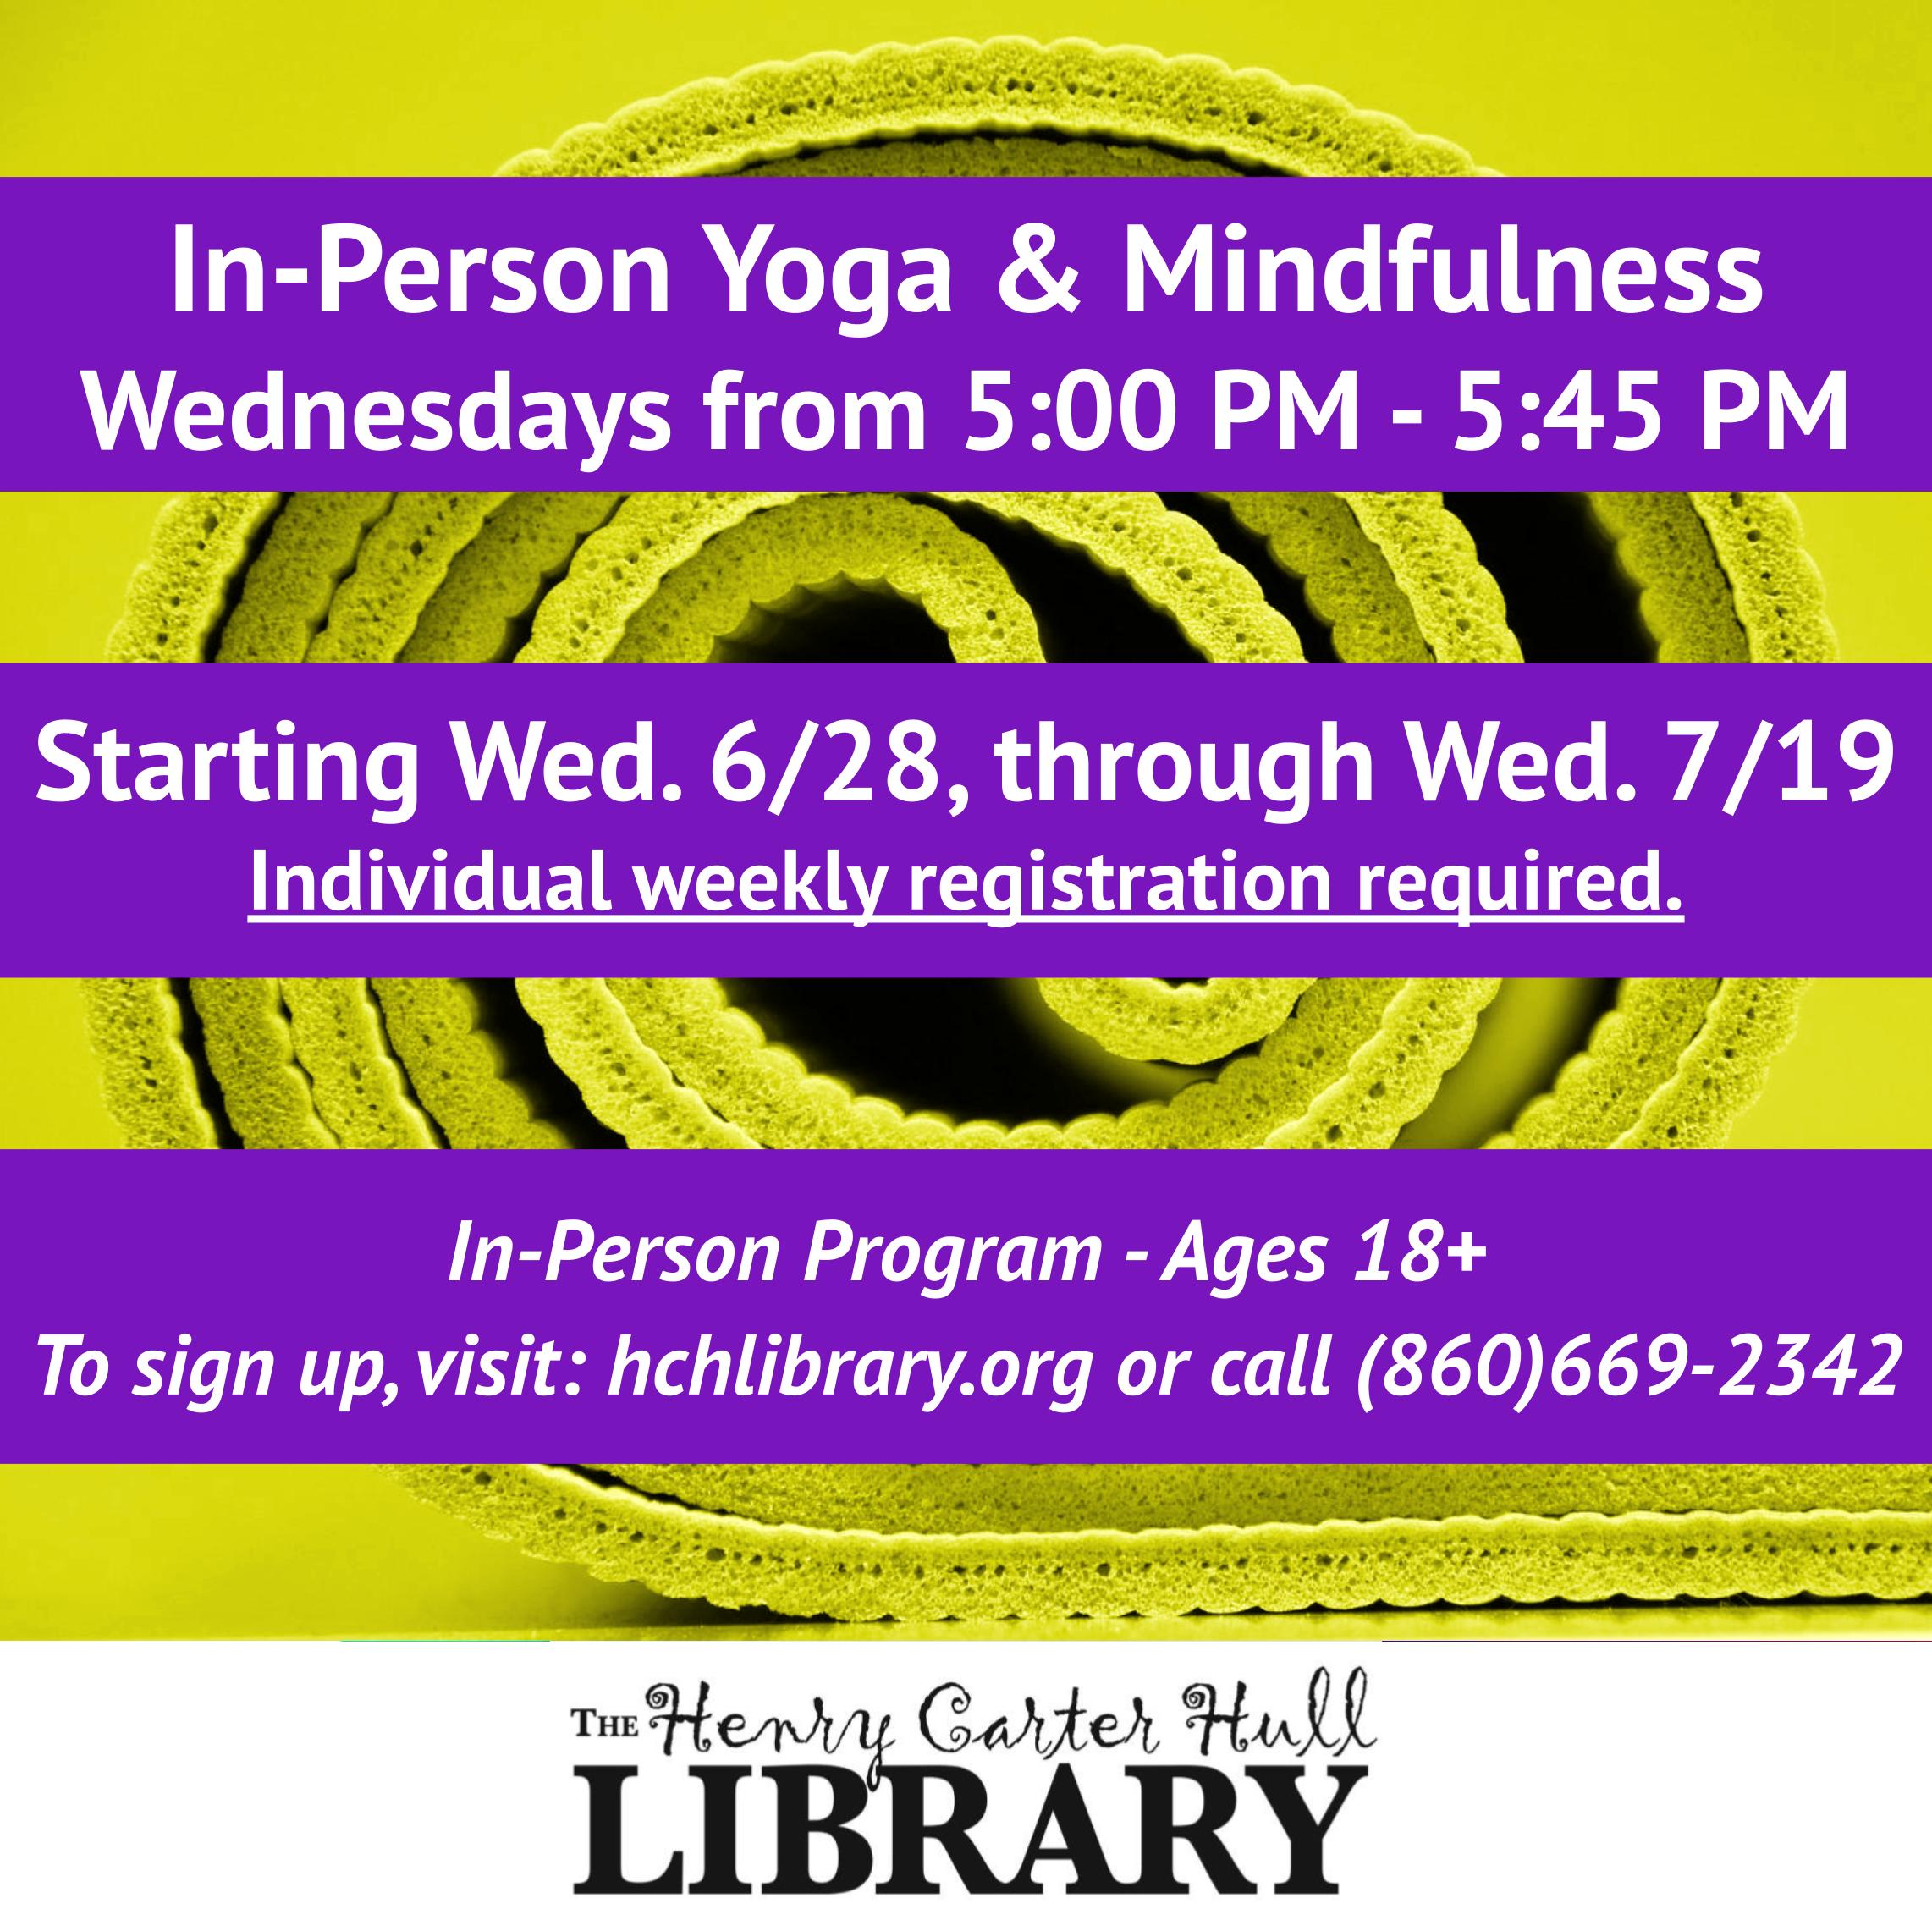 In-Person Yoga & Mindfulness